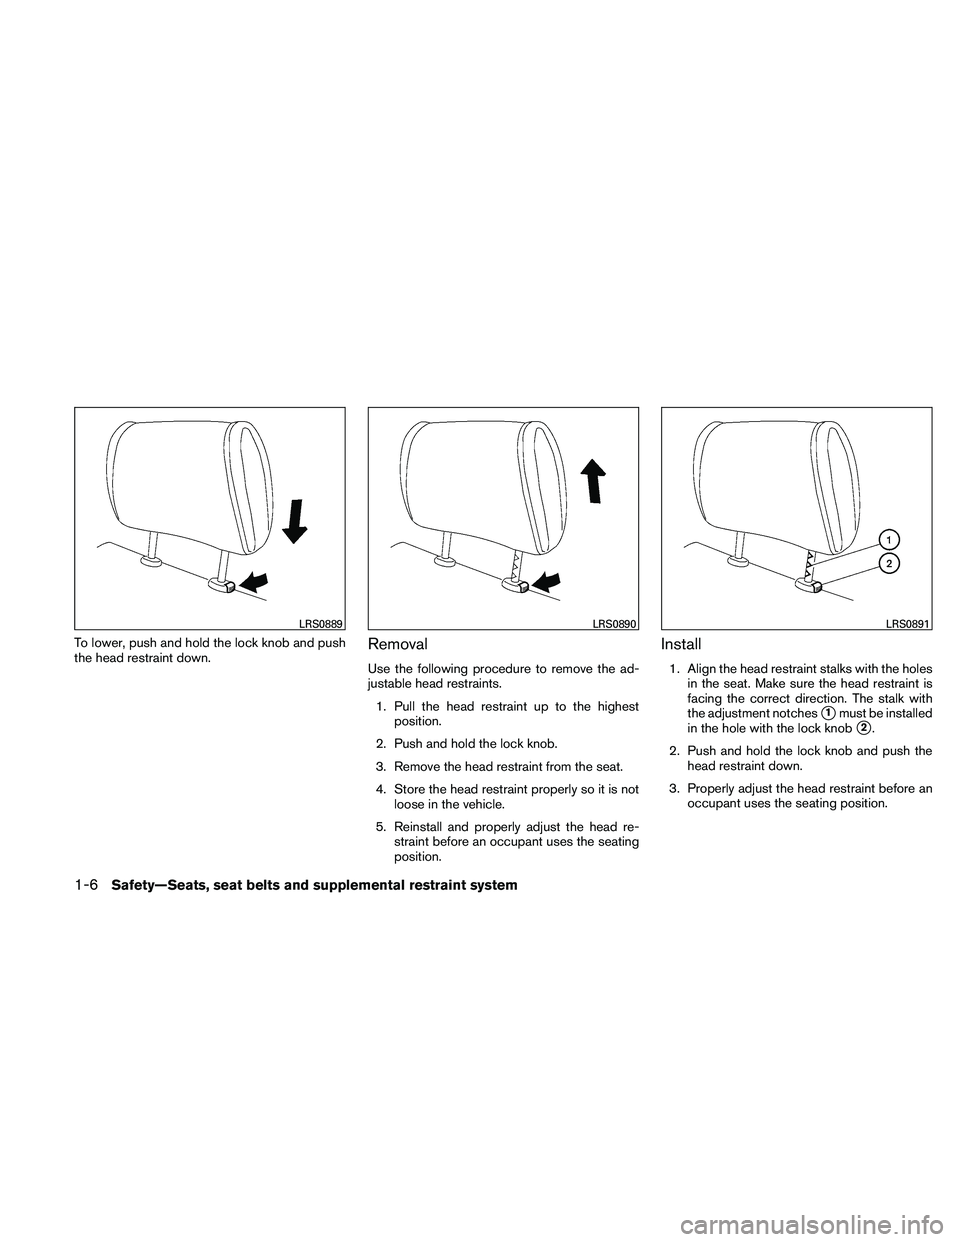 NISSAN XTERRA 2010  Owner´s Manual To lower, push and hold the lock knob and push
the head restraint down.Removal
Use the following procedure to remove the ad-
justable head restraints.1. Pull the head restraint up to the highest posit